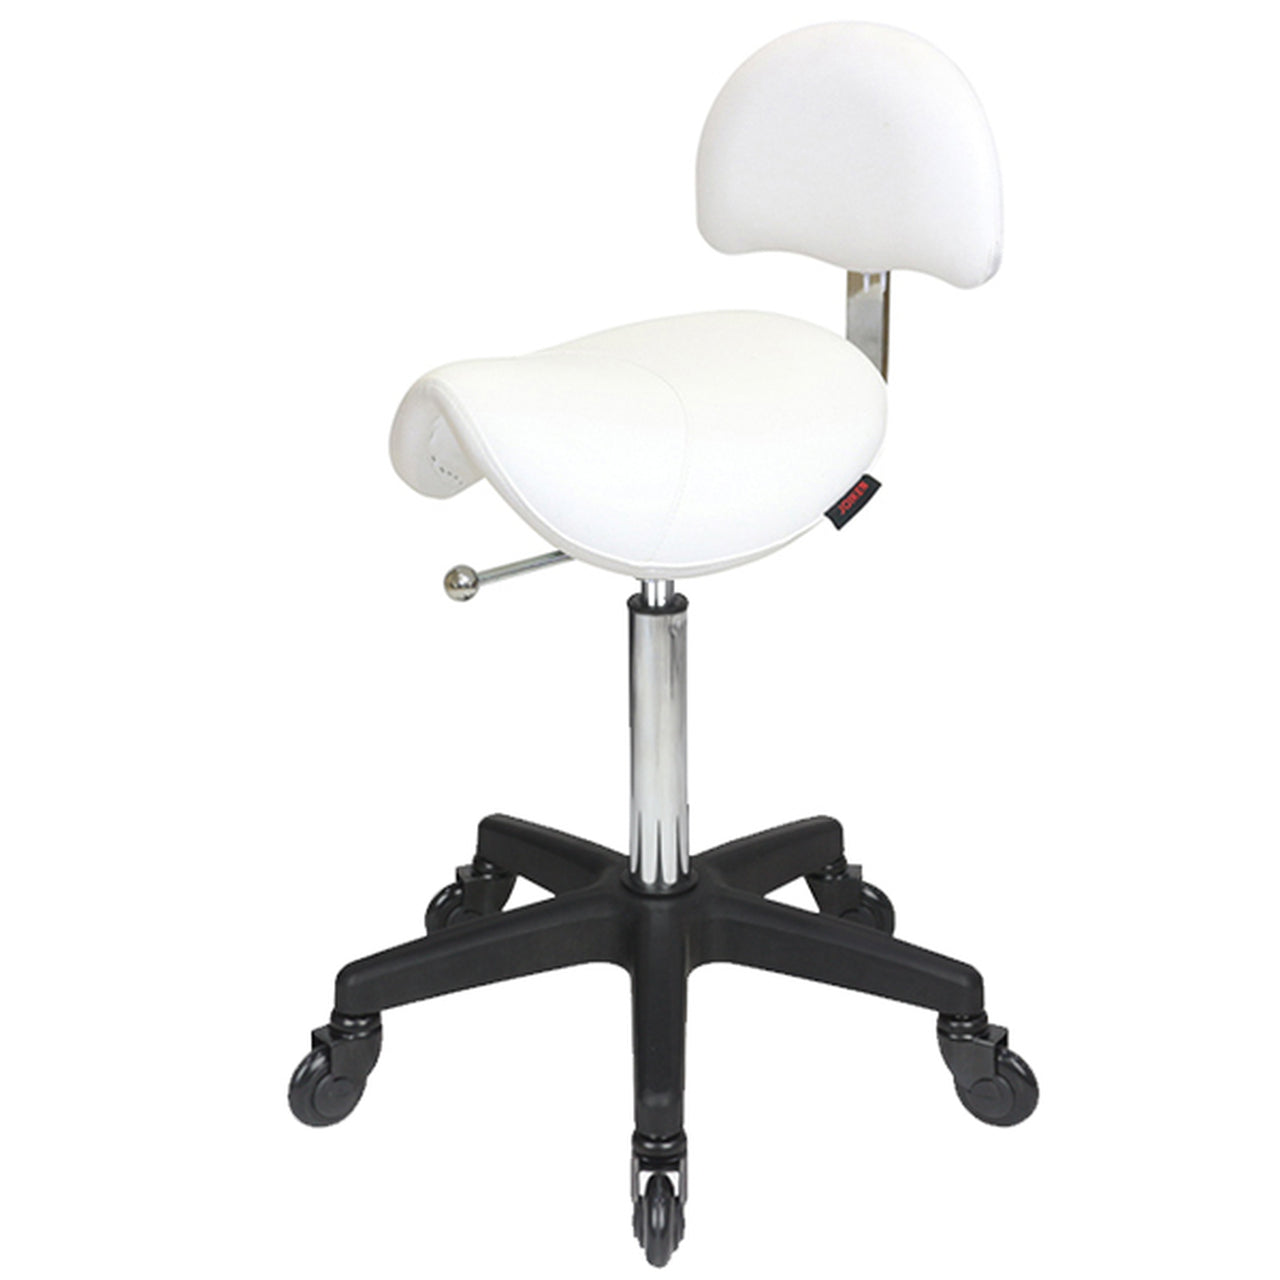 Saddle - With Back - Black Base - (White Upholstery) With
CLICK'NCLEAN Castors